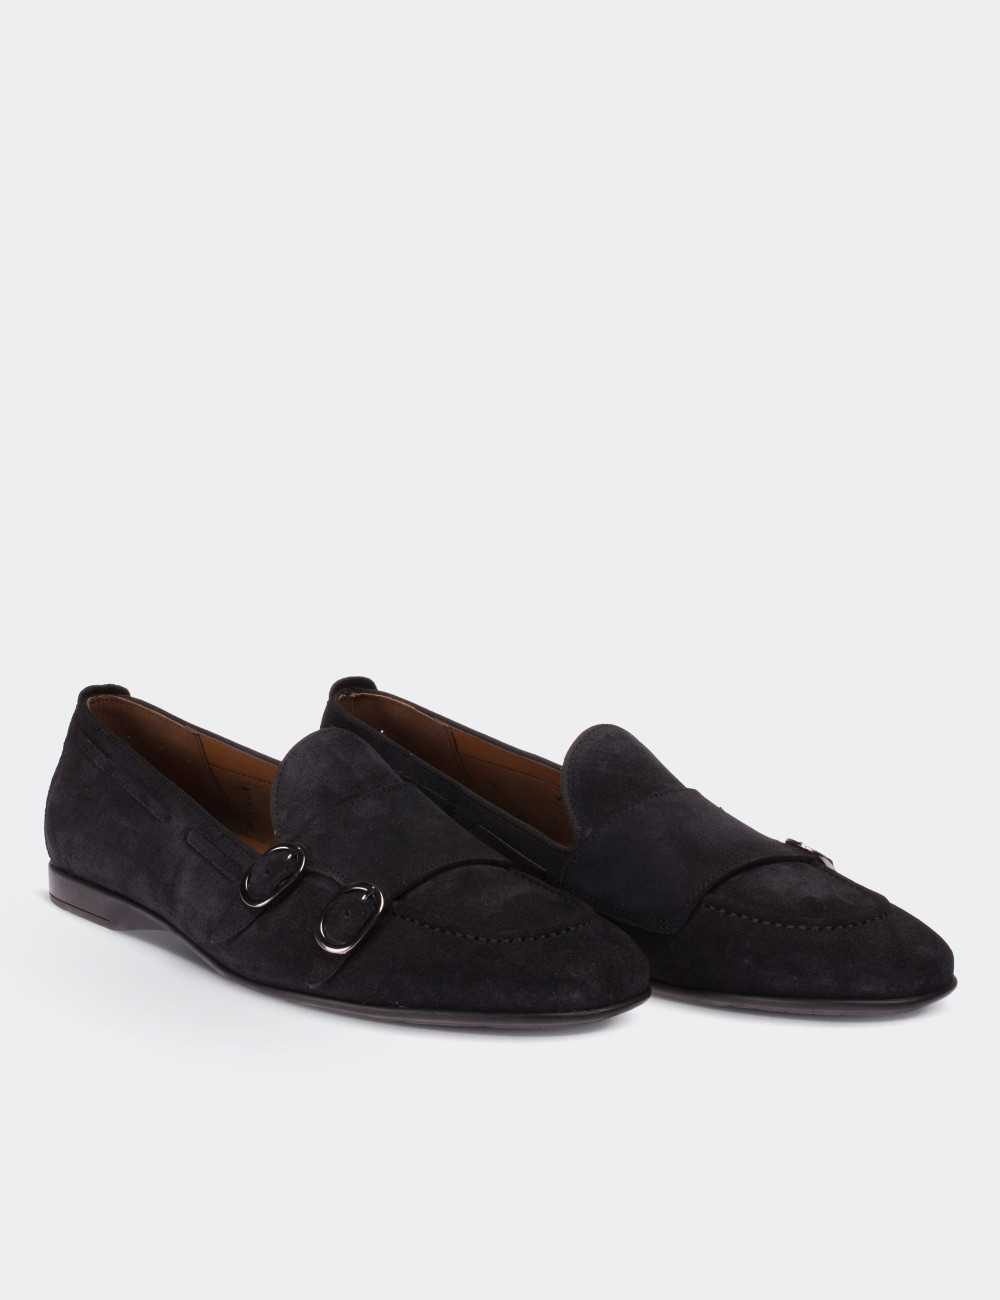 Navy Suede Leather Loafers - 01645MLCVC02